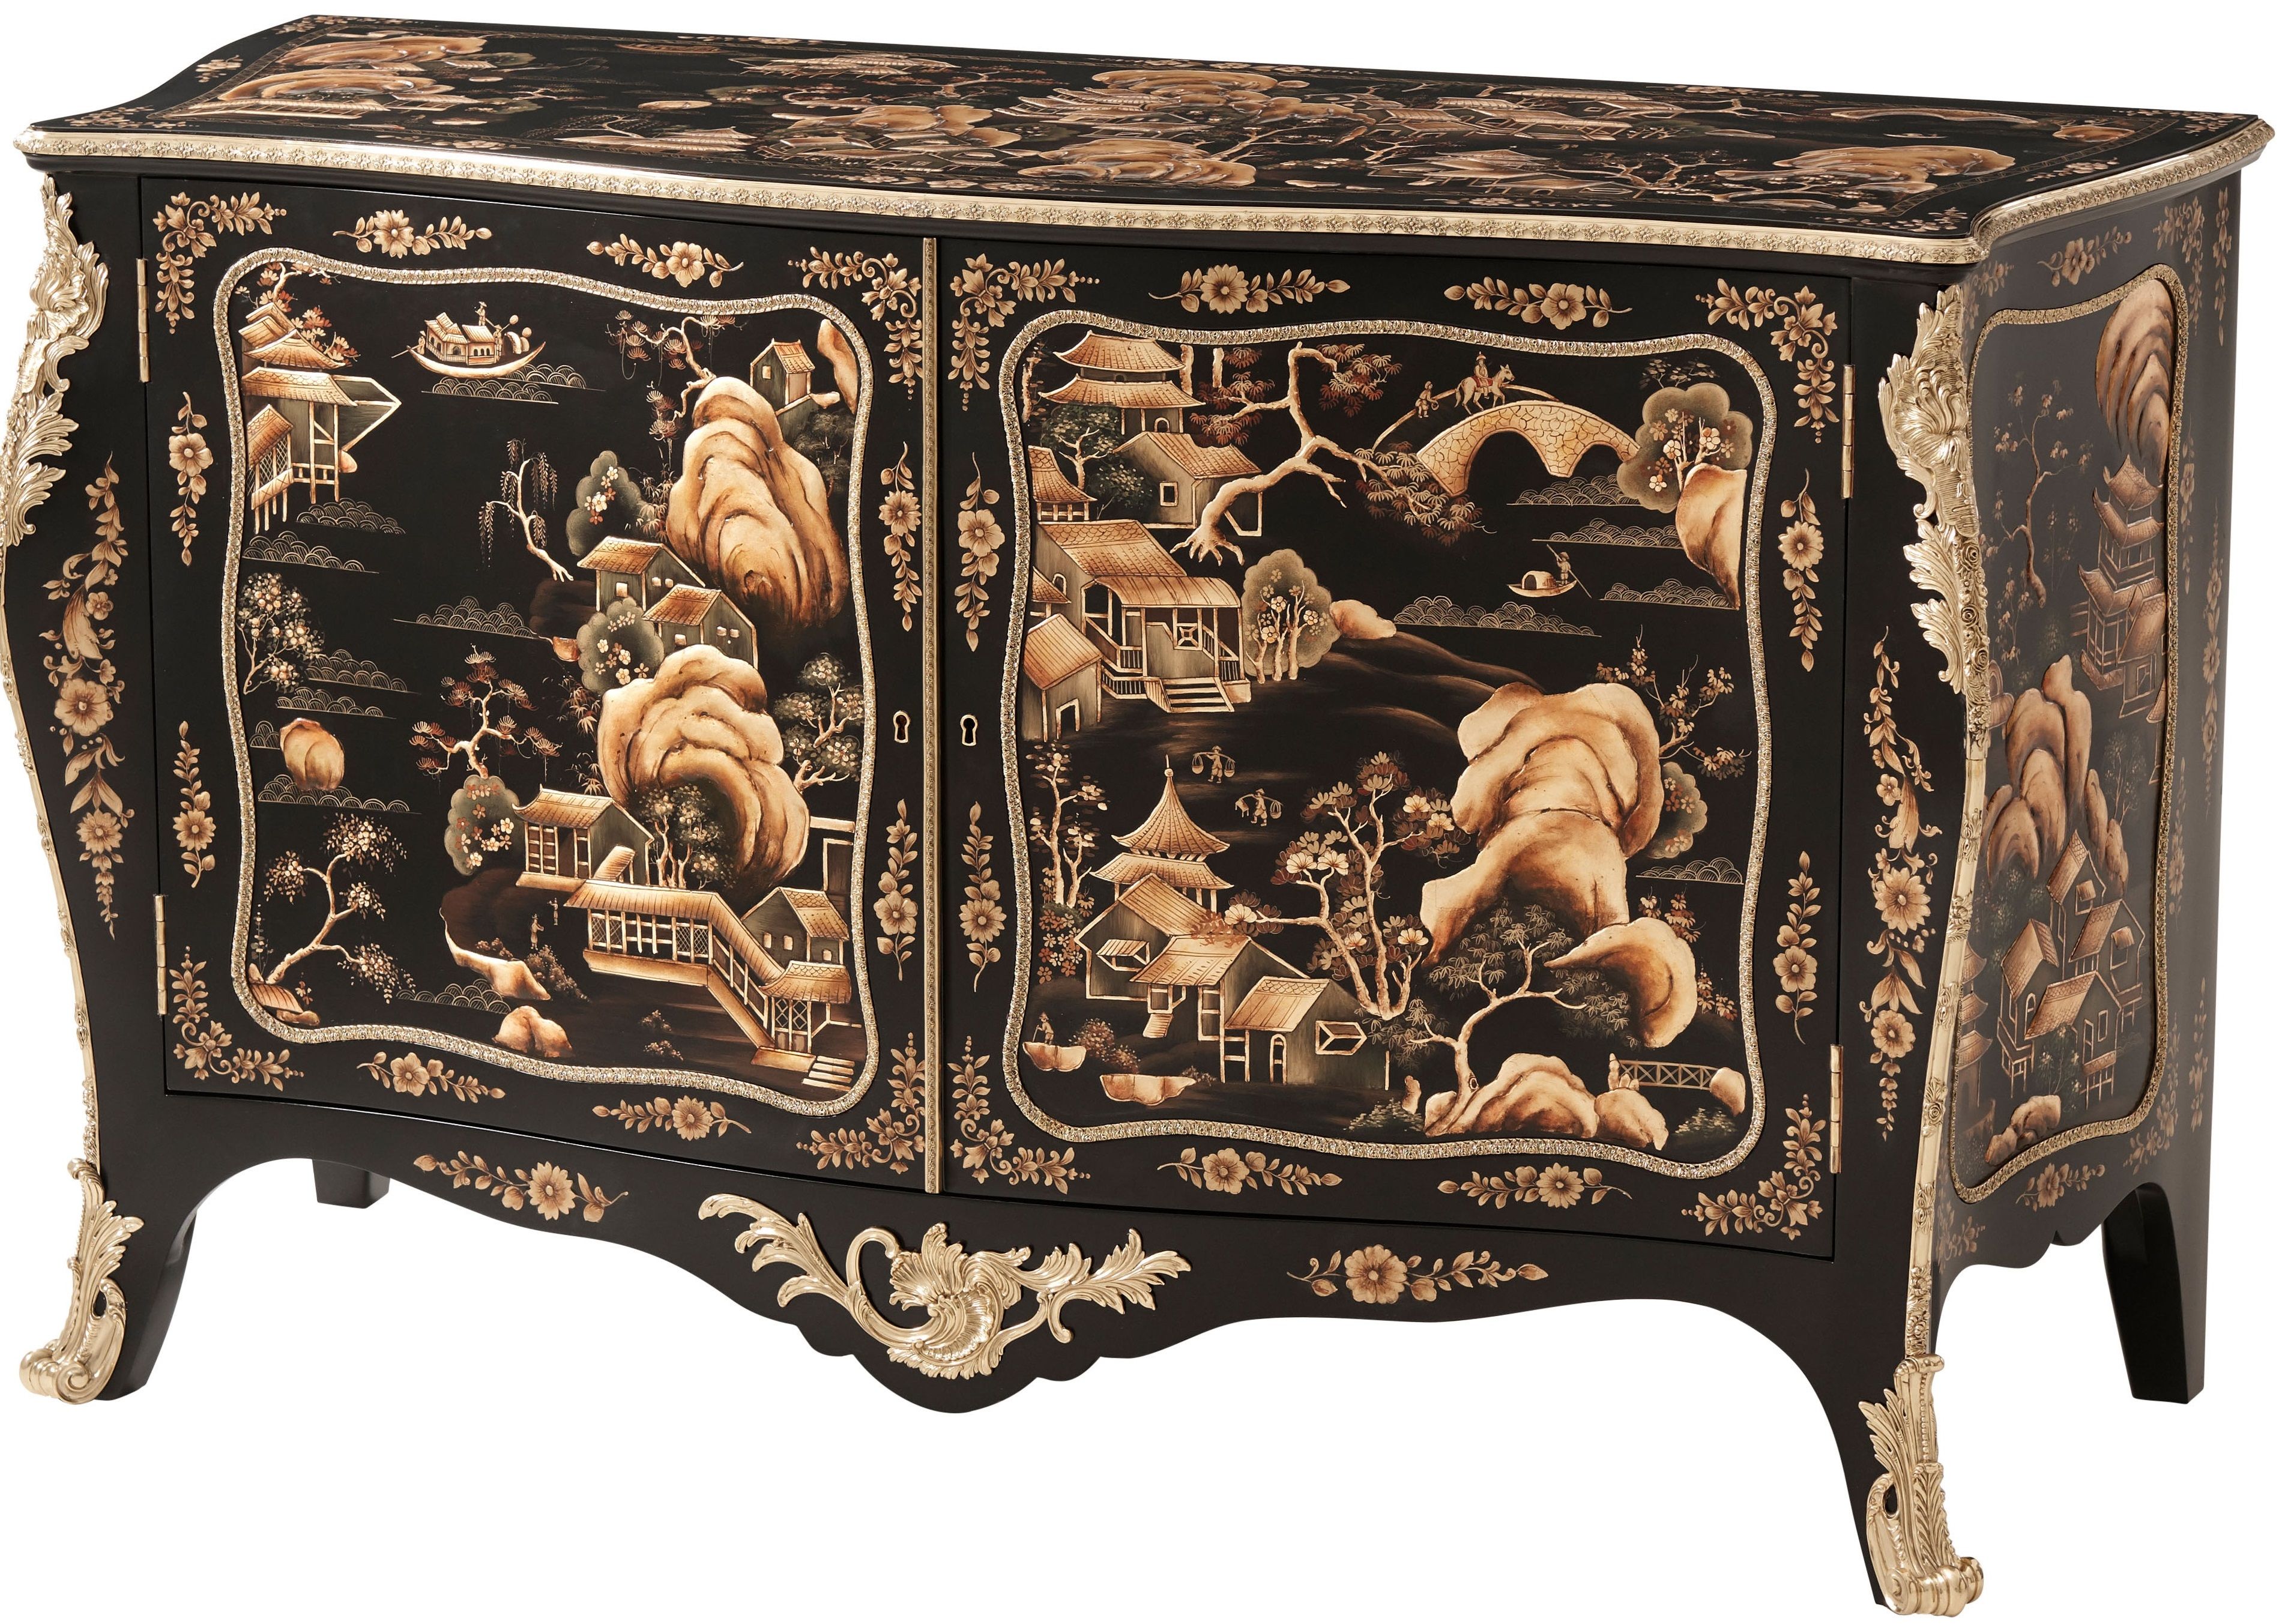 Chinoiserie landscapes and floral details